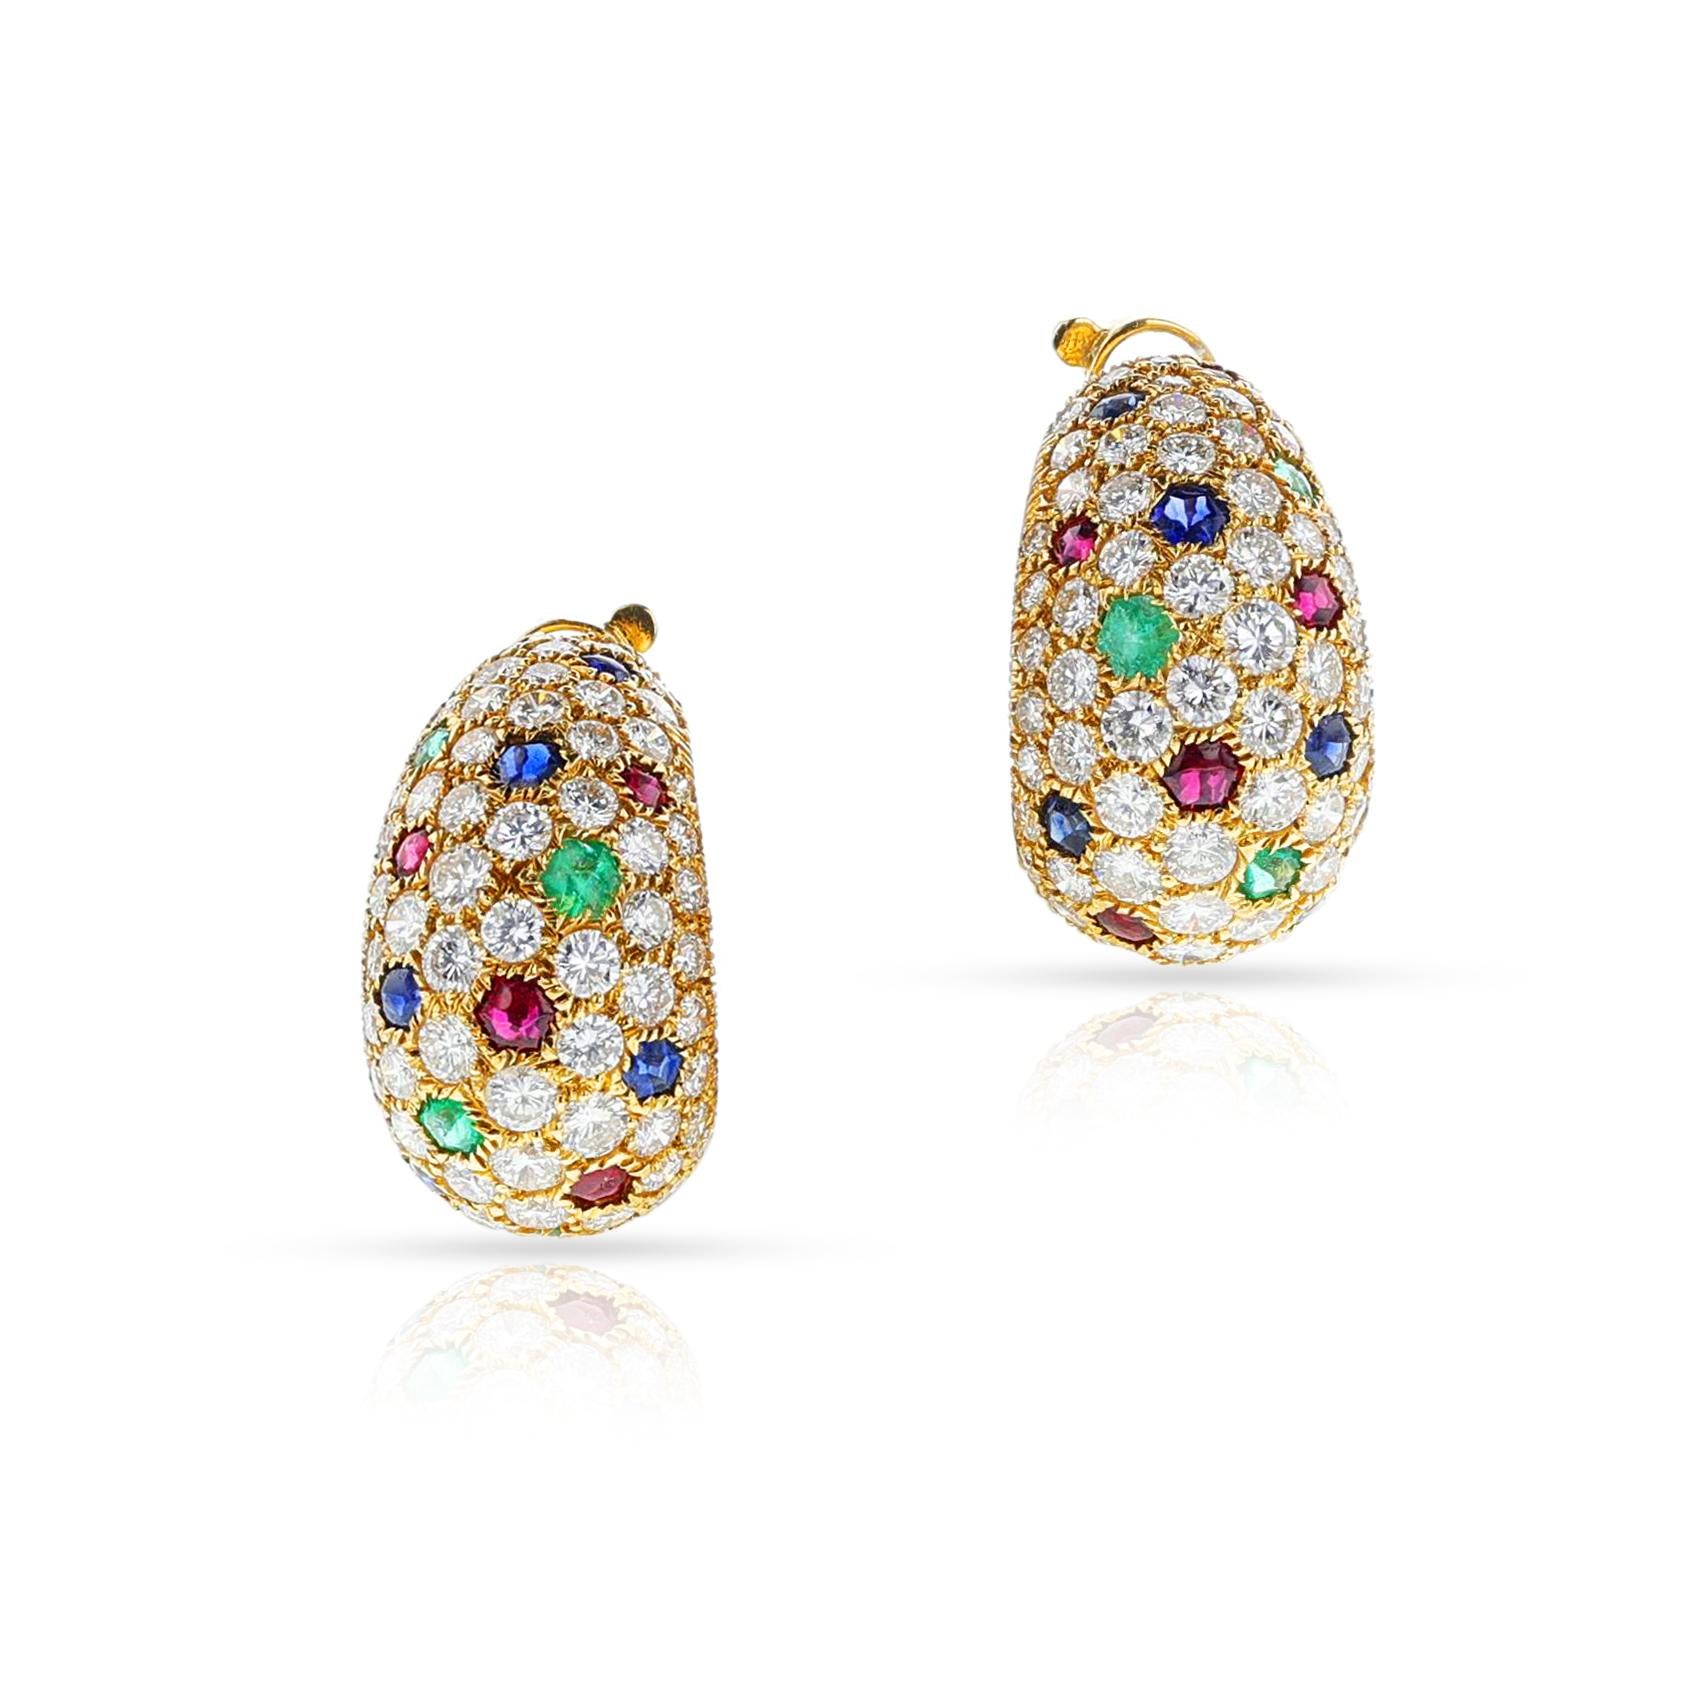 A pair of Cartier France Ruby, Emerald, Sapphire and Diamond Gem-Set Earrings made in 18k Yellow Gold. The design is of a half-hoop, pavé set. The diamonds weigh appx. 7.25 carats, appx. E-G color and VVS-VS clarity. The length is ¾ inches. Signed